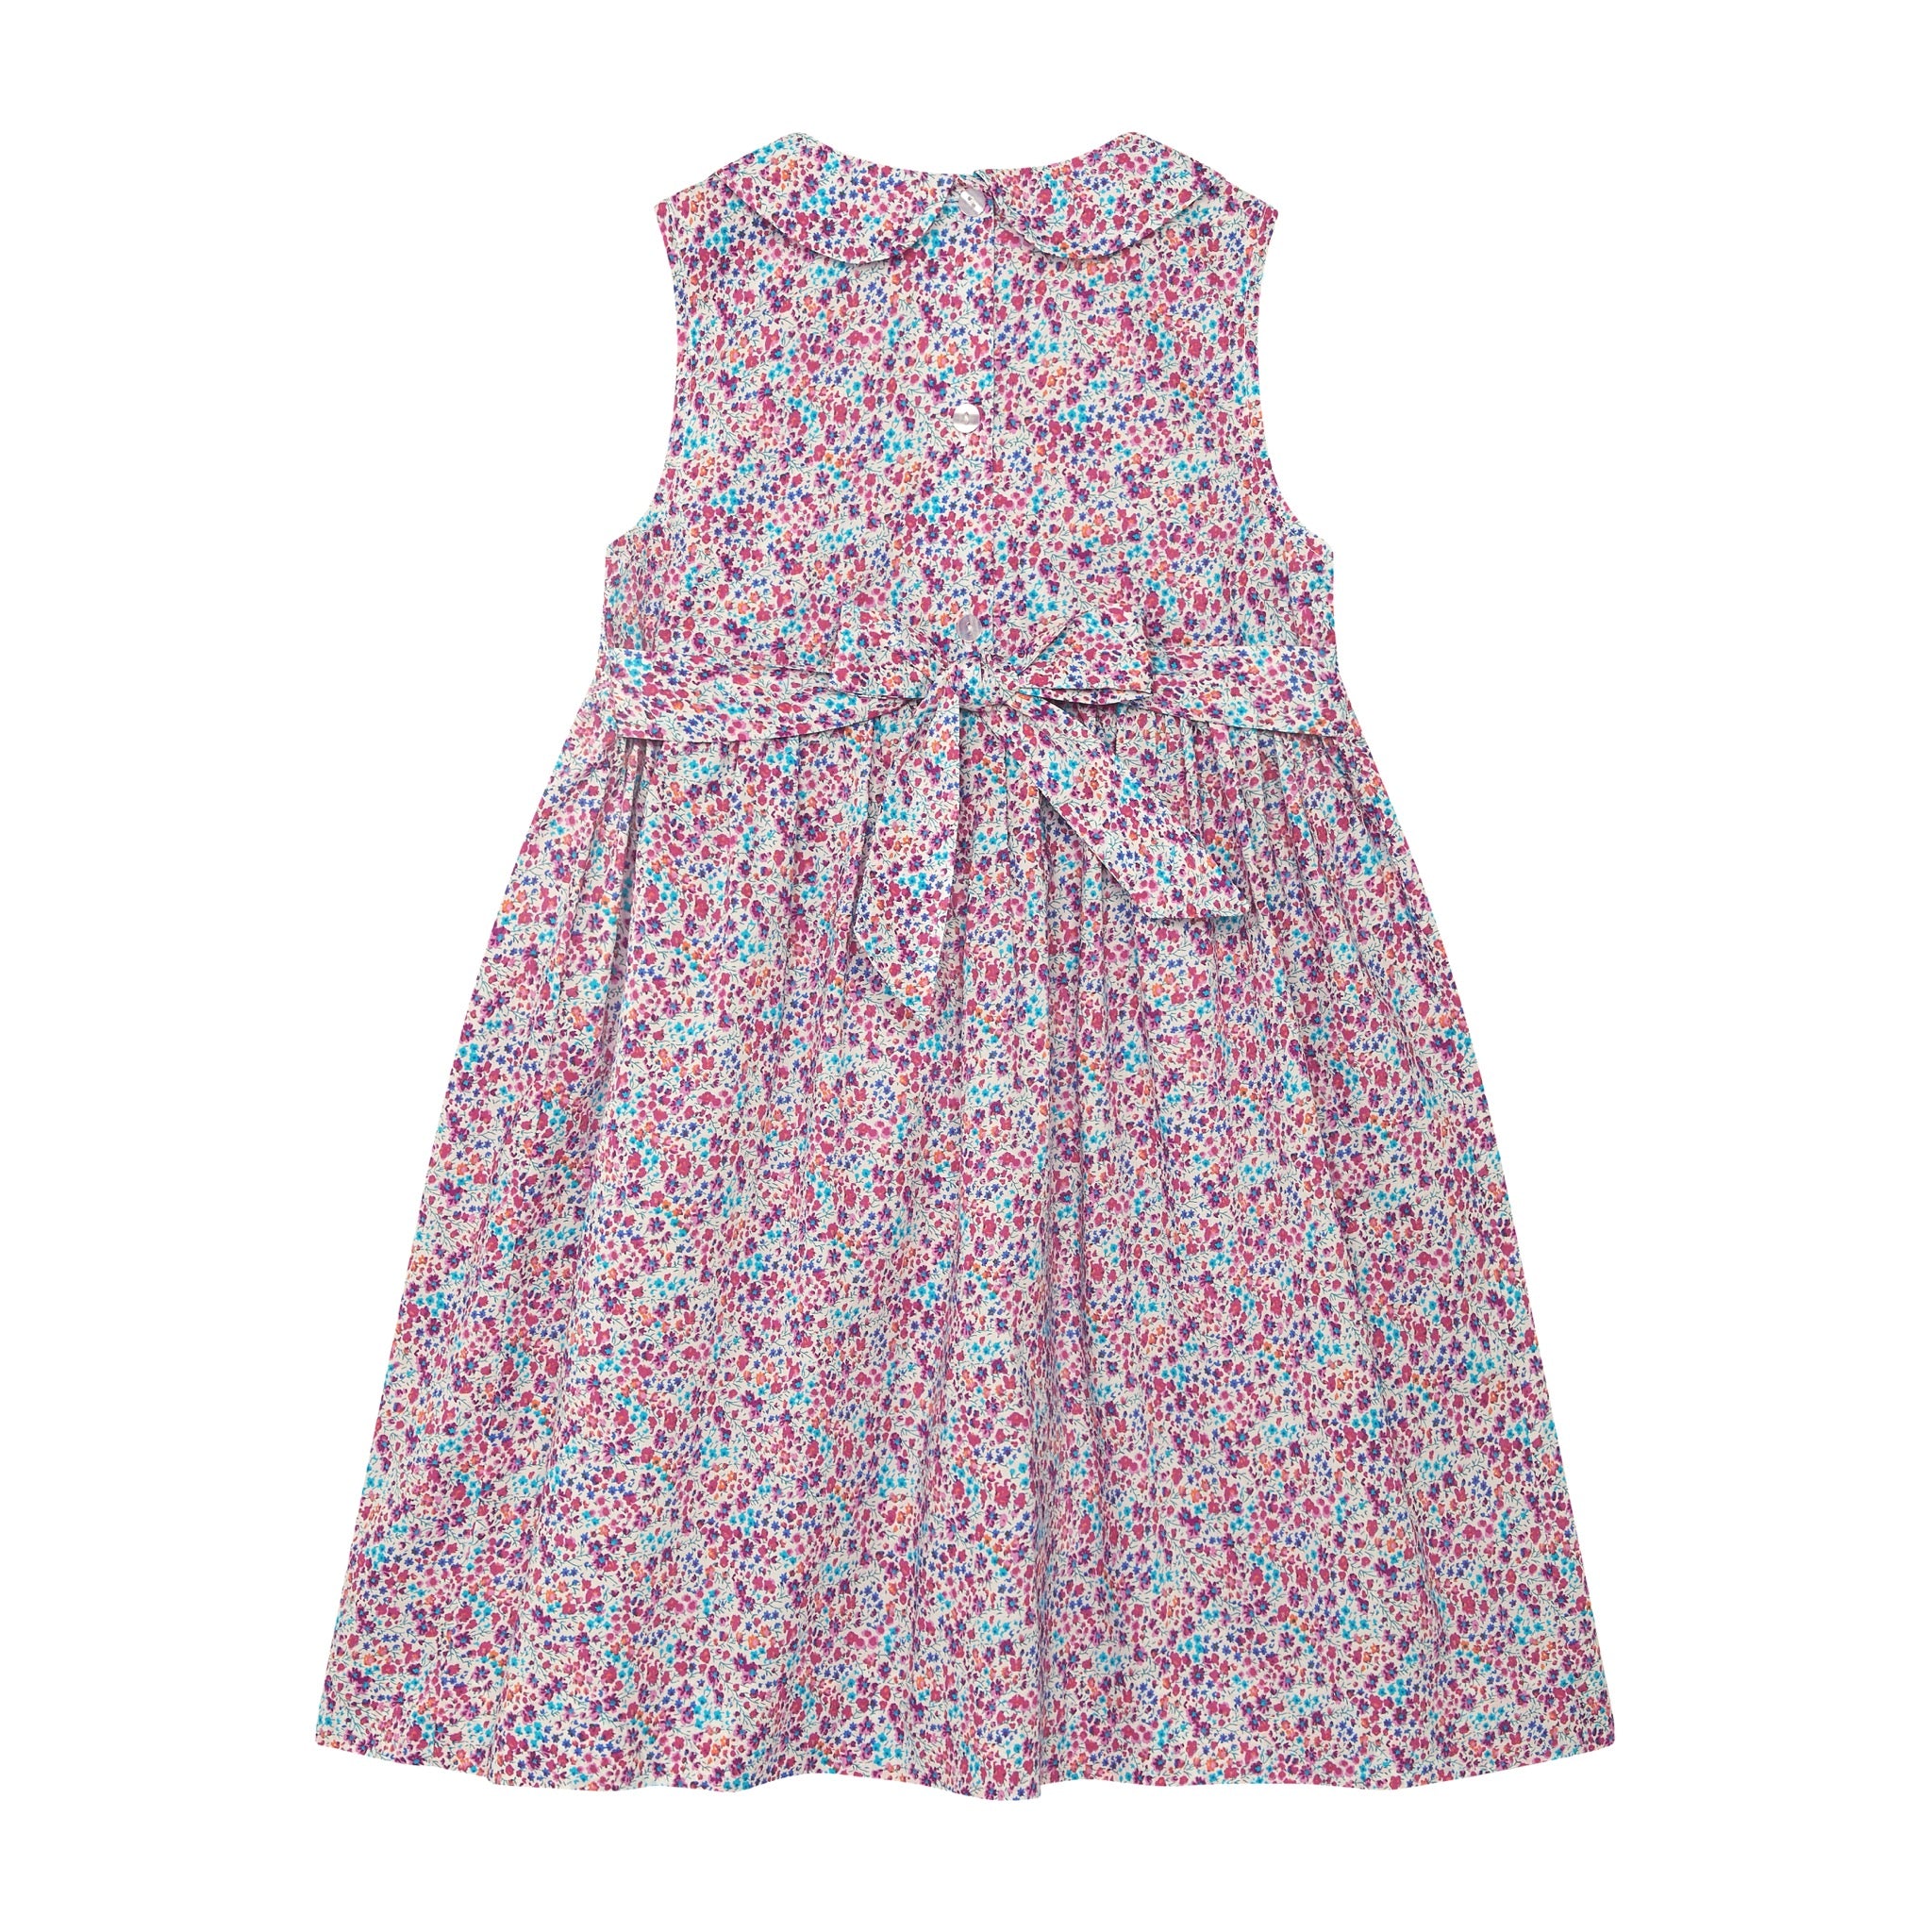 ditzy floral smock dress for girls, abck